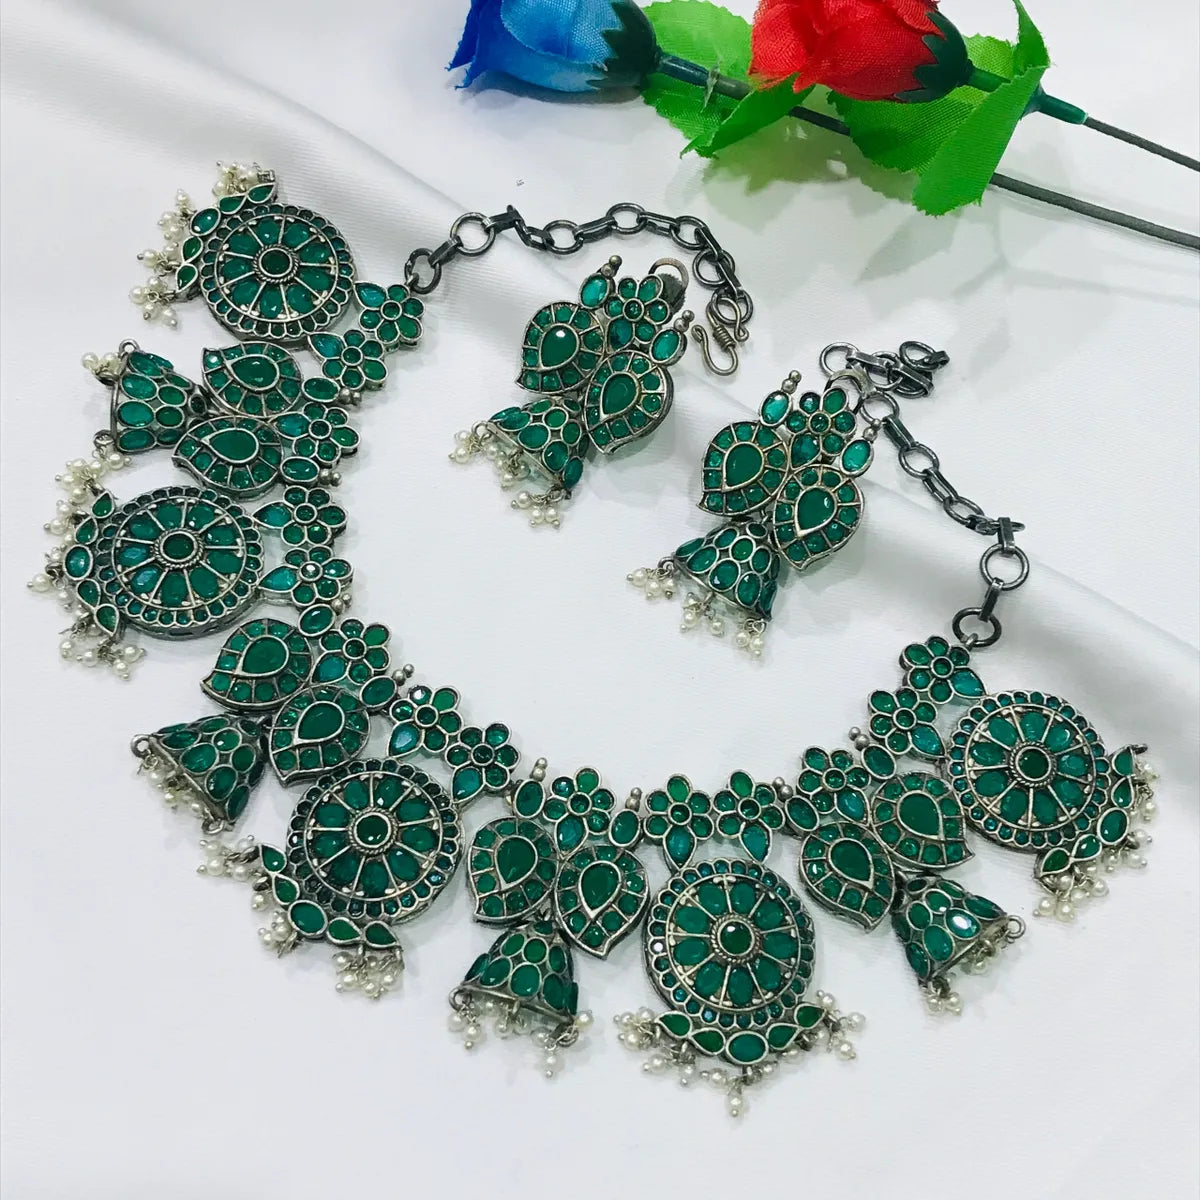 Handcrafted Oxidized Necklace With Earrings In USA